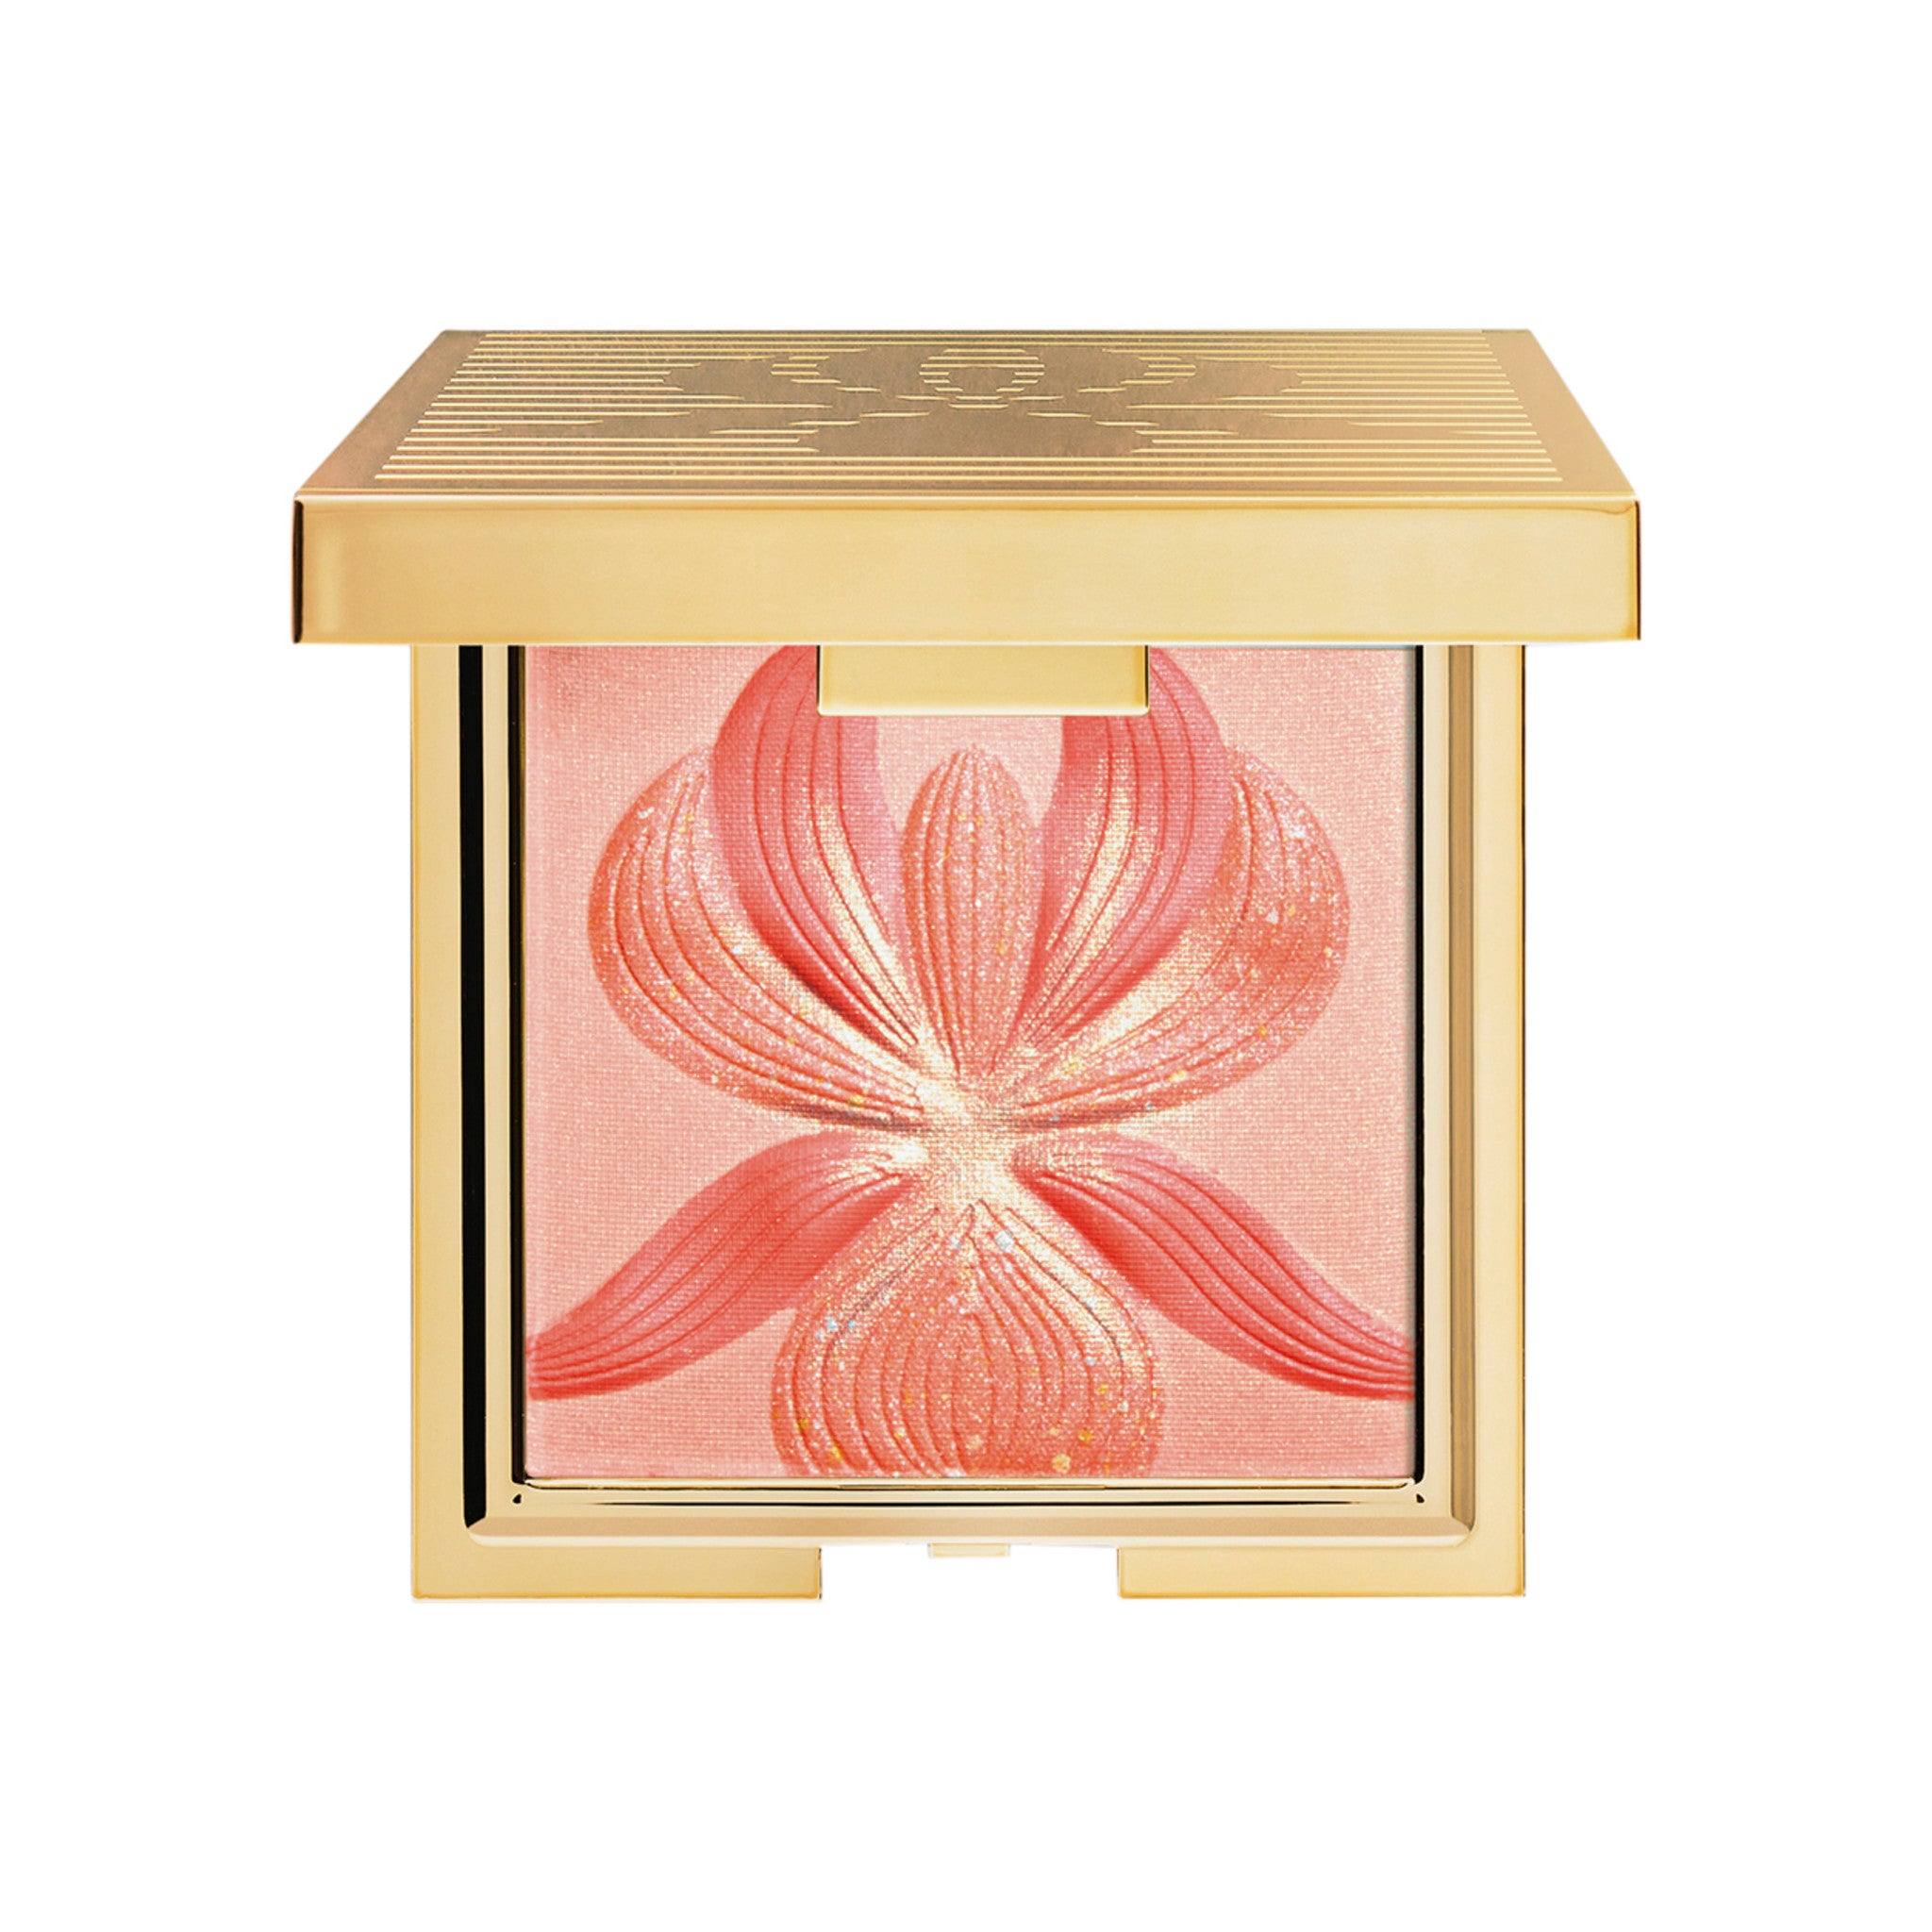 Sisley-Paris L'Orchidée Blush Color/Shade variant: 3 L'Orchidee Corail main image. This product is in the color coral